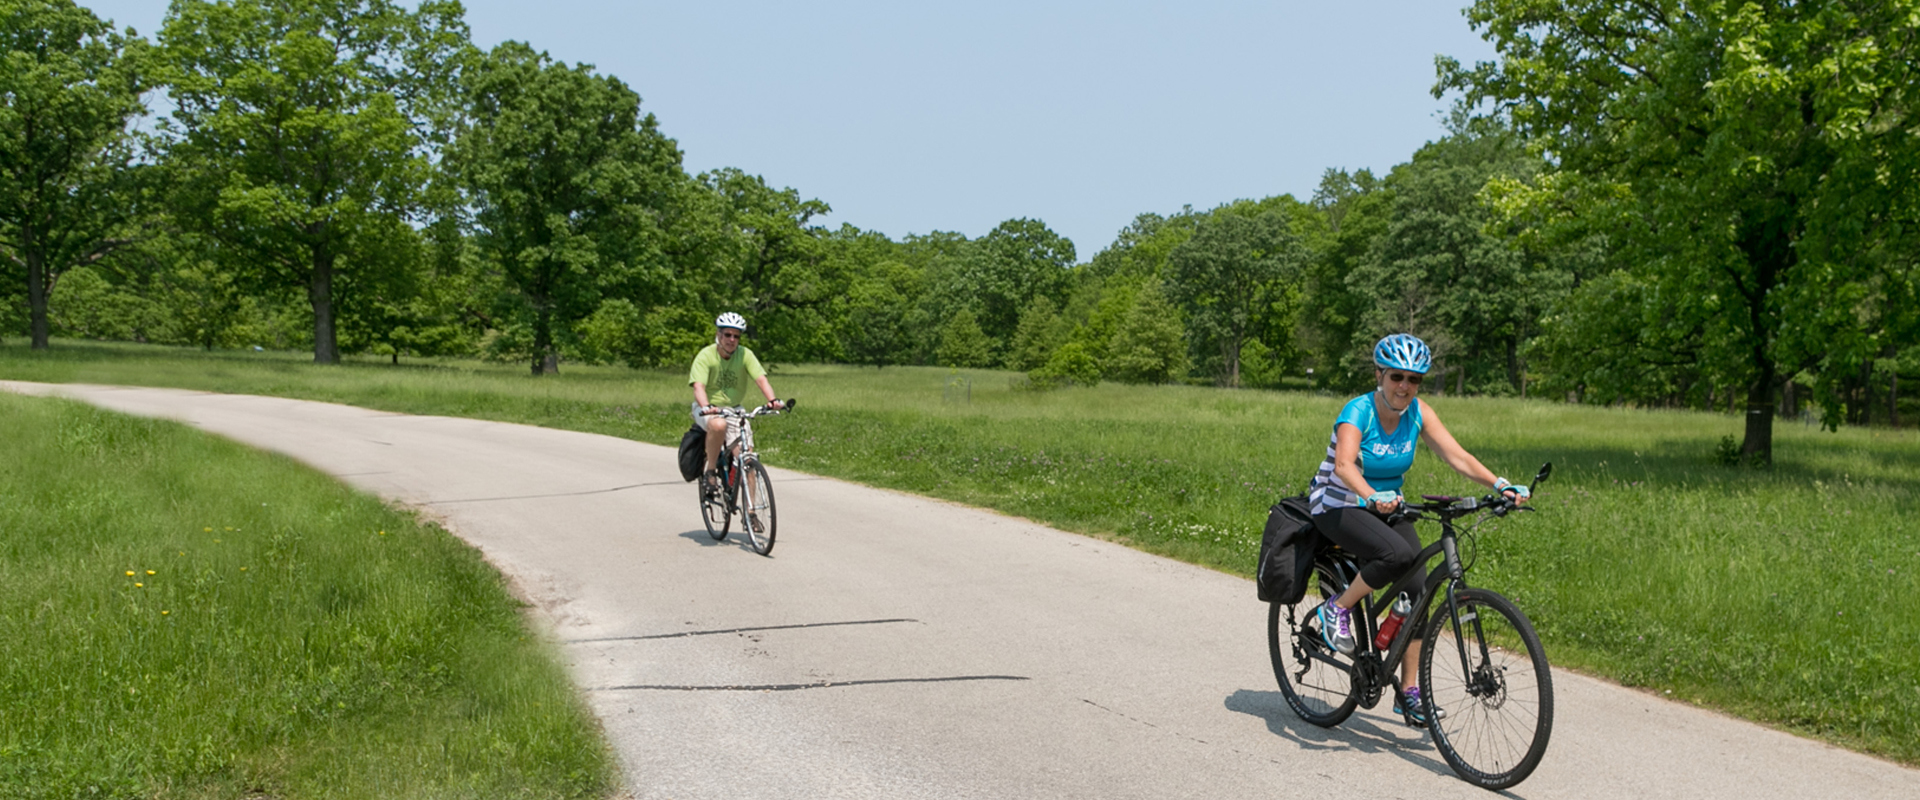 Photograph of two visitors biking on a paved trail at The Morton Arboretum